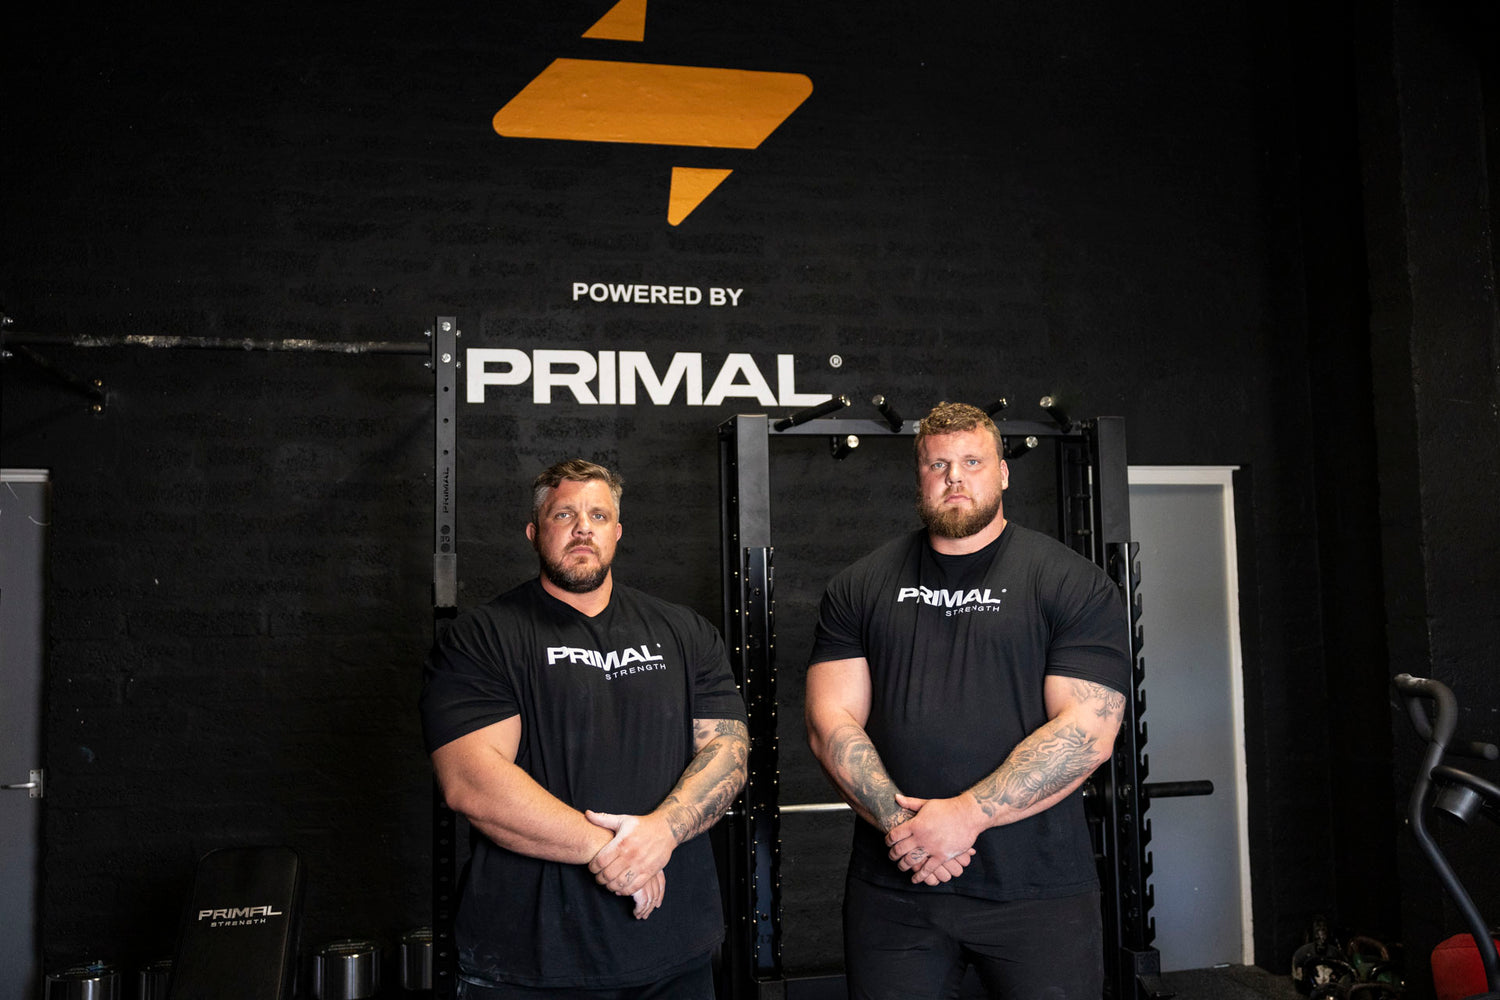 THE WORLD’S STRONGEST – POWERED BY PRIMAL